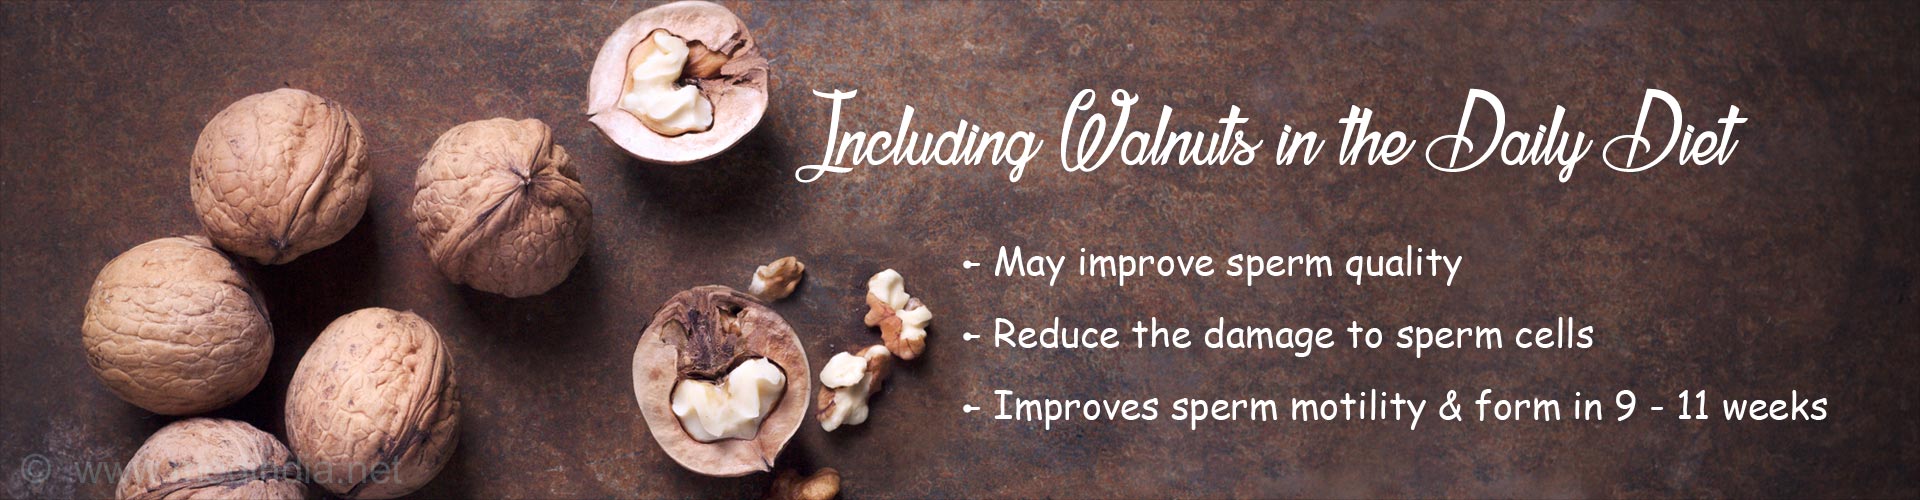 including walnuts in the daily diet
- may improve sperm quality
- reduce the damage to sperm cells
- improves sperm motility and form in 9-11 weeks 